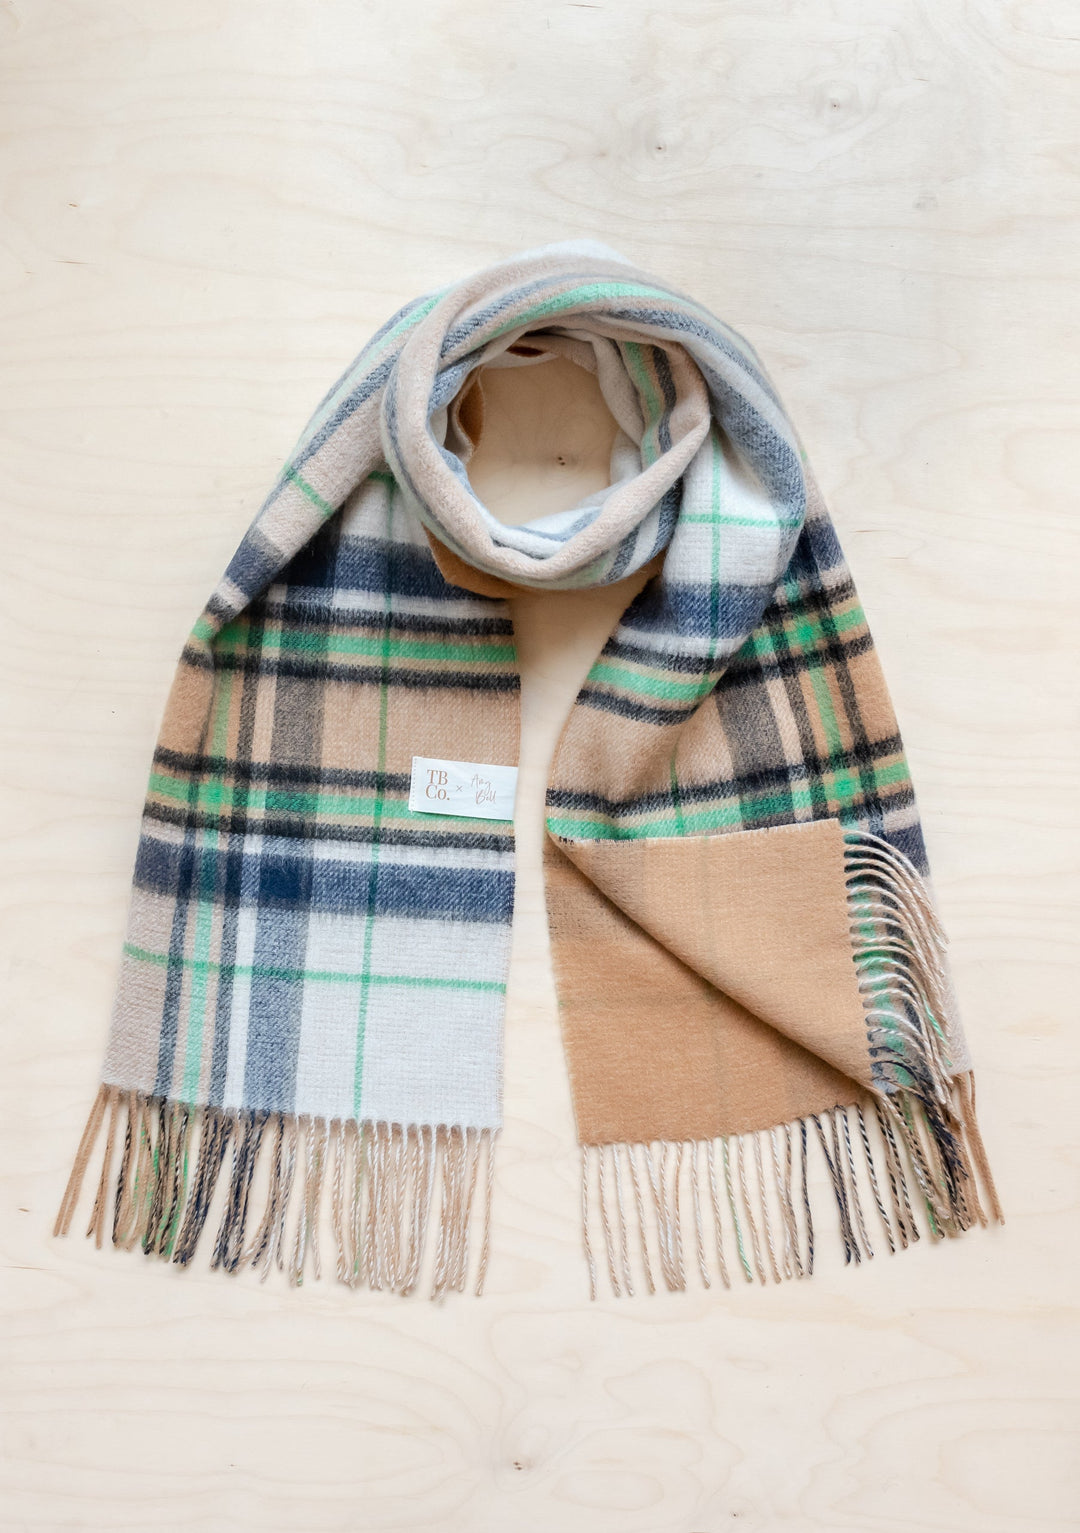 TBCo. x Amy Bell Emily Scarf